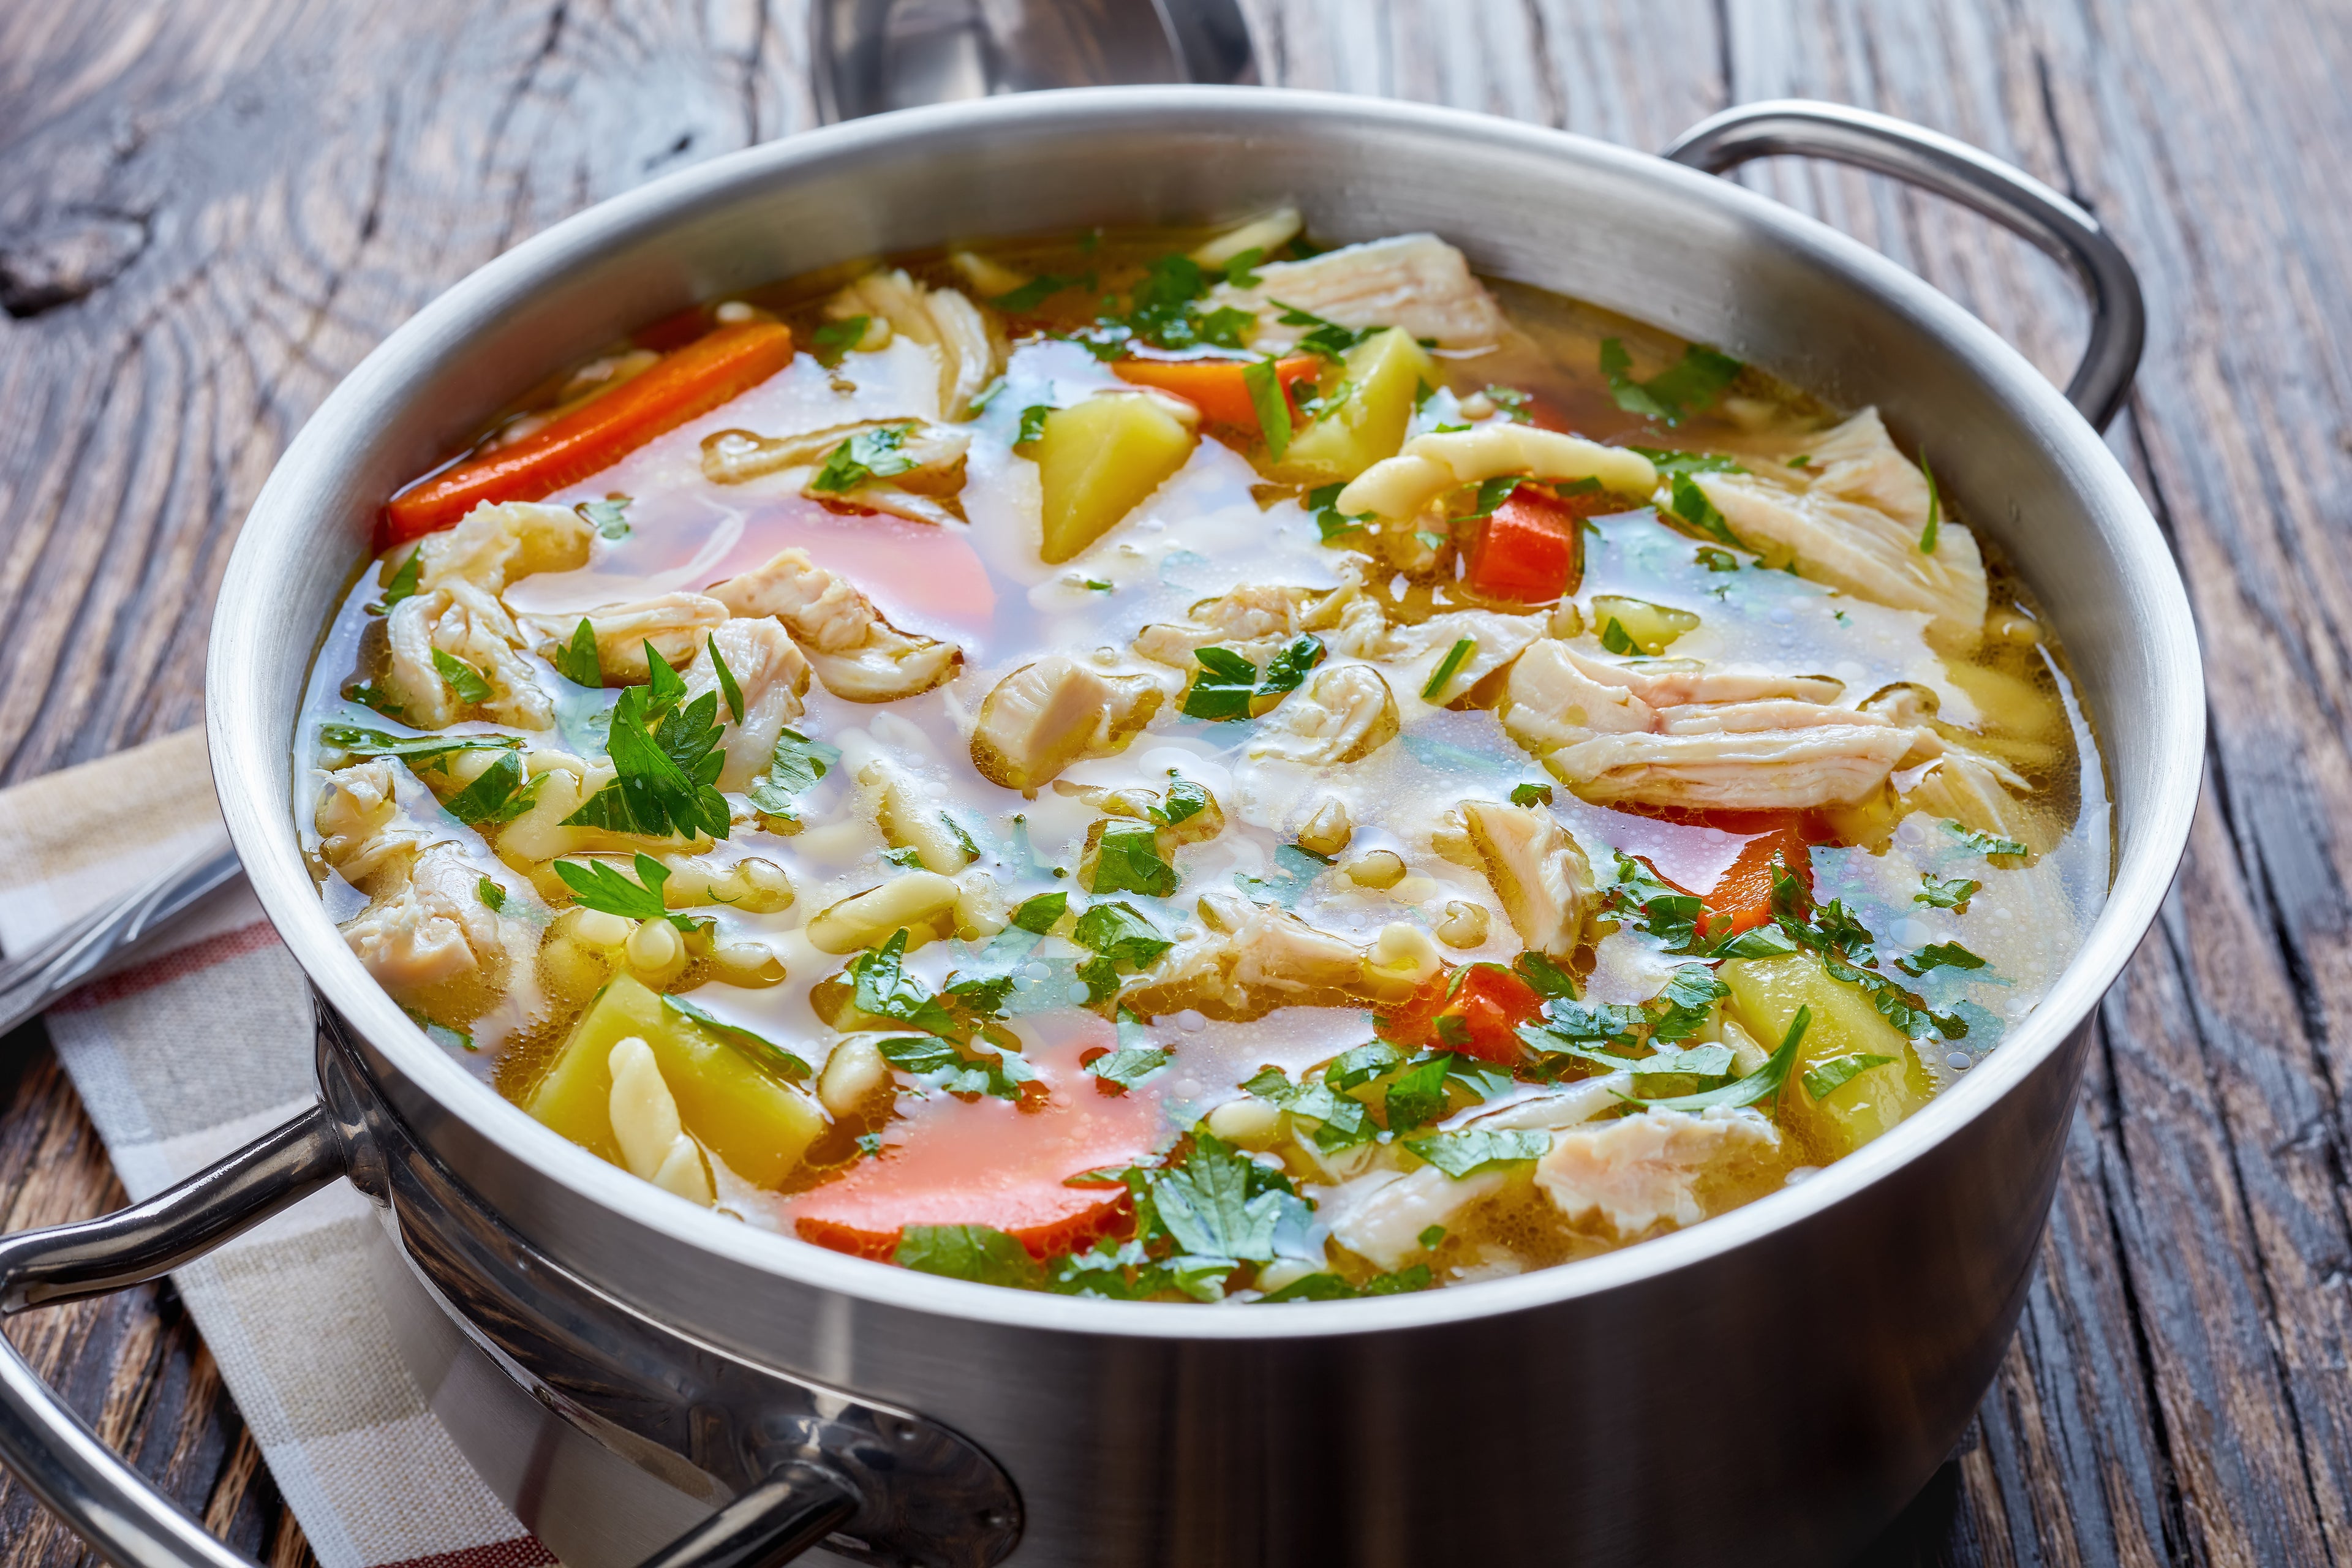 Chicken Soup is a comforting soup made with chicken broth, diced celery, carrots, and noodles or rice.